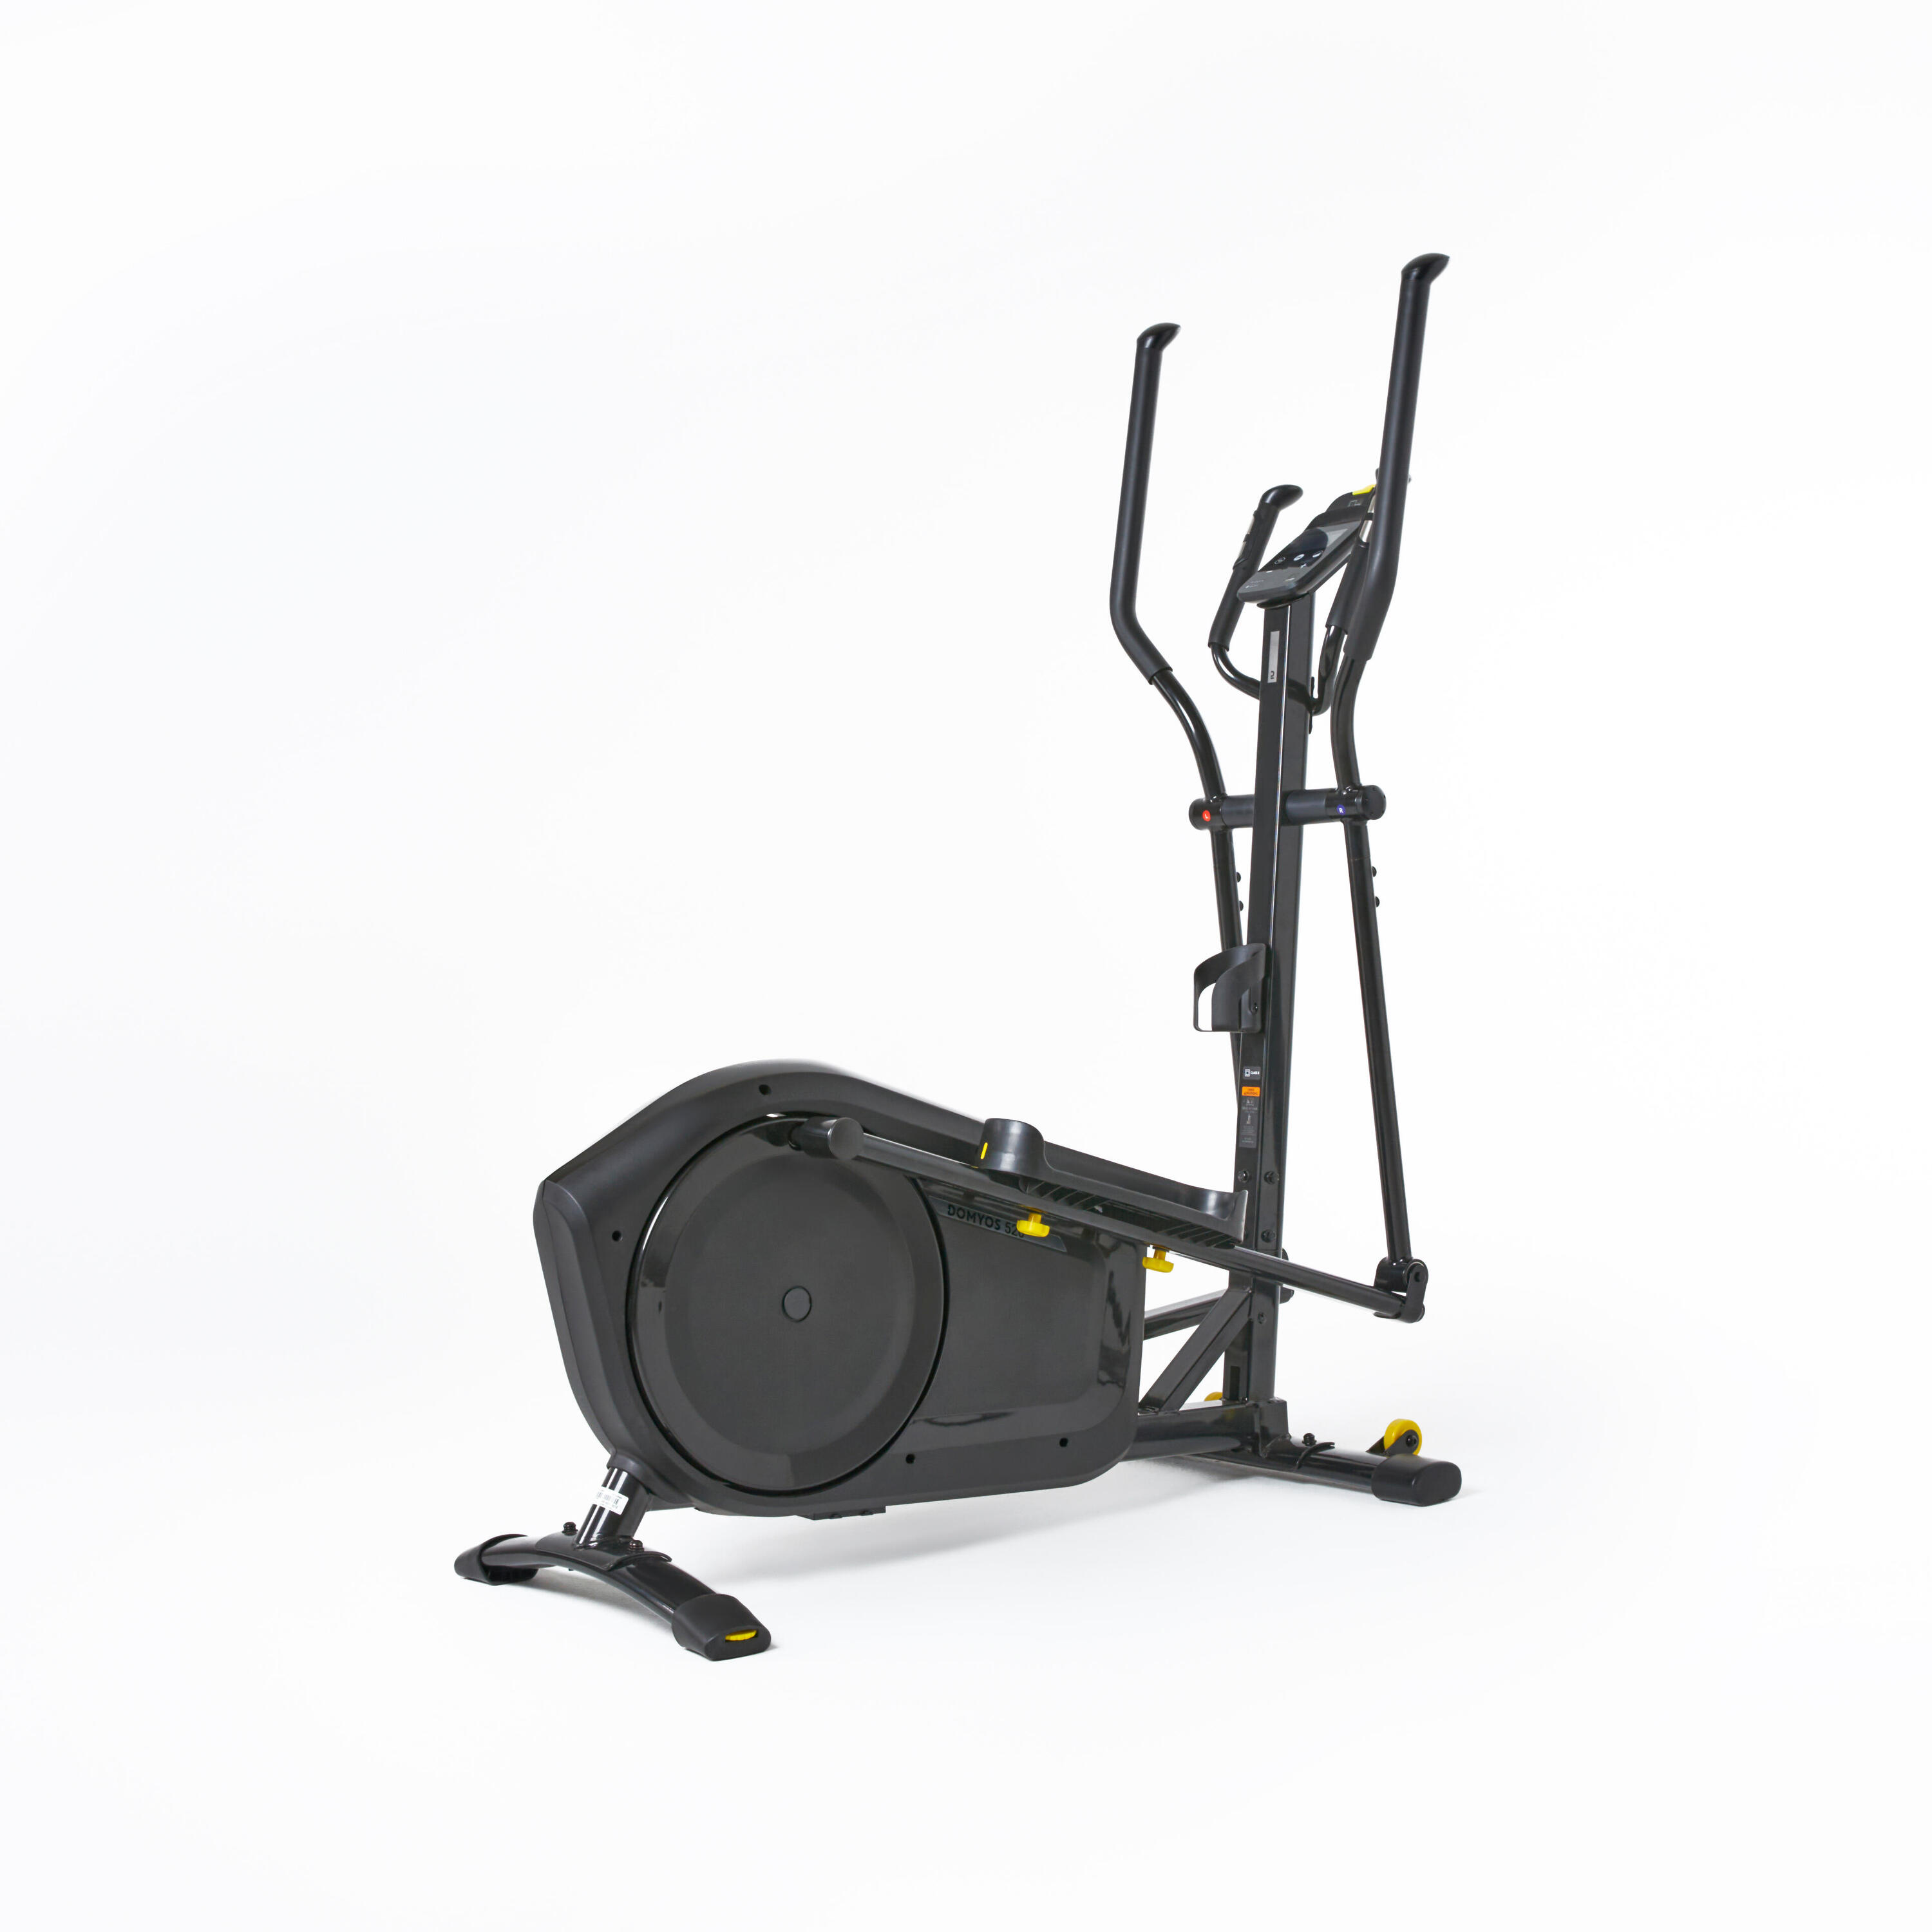 Self-Powered and Connected, E-Connected and Kinomap Cross Trainer EL520B 1/4